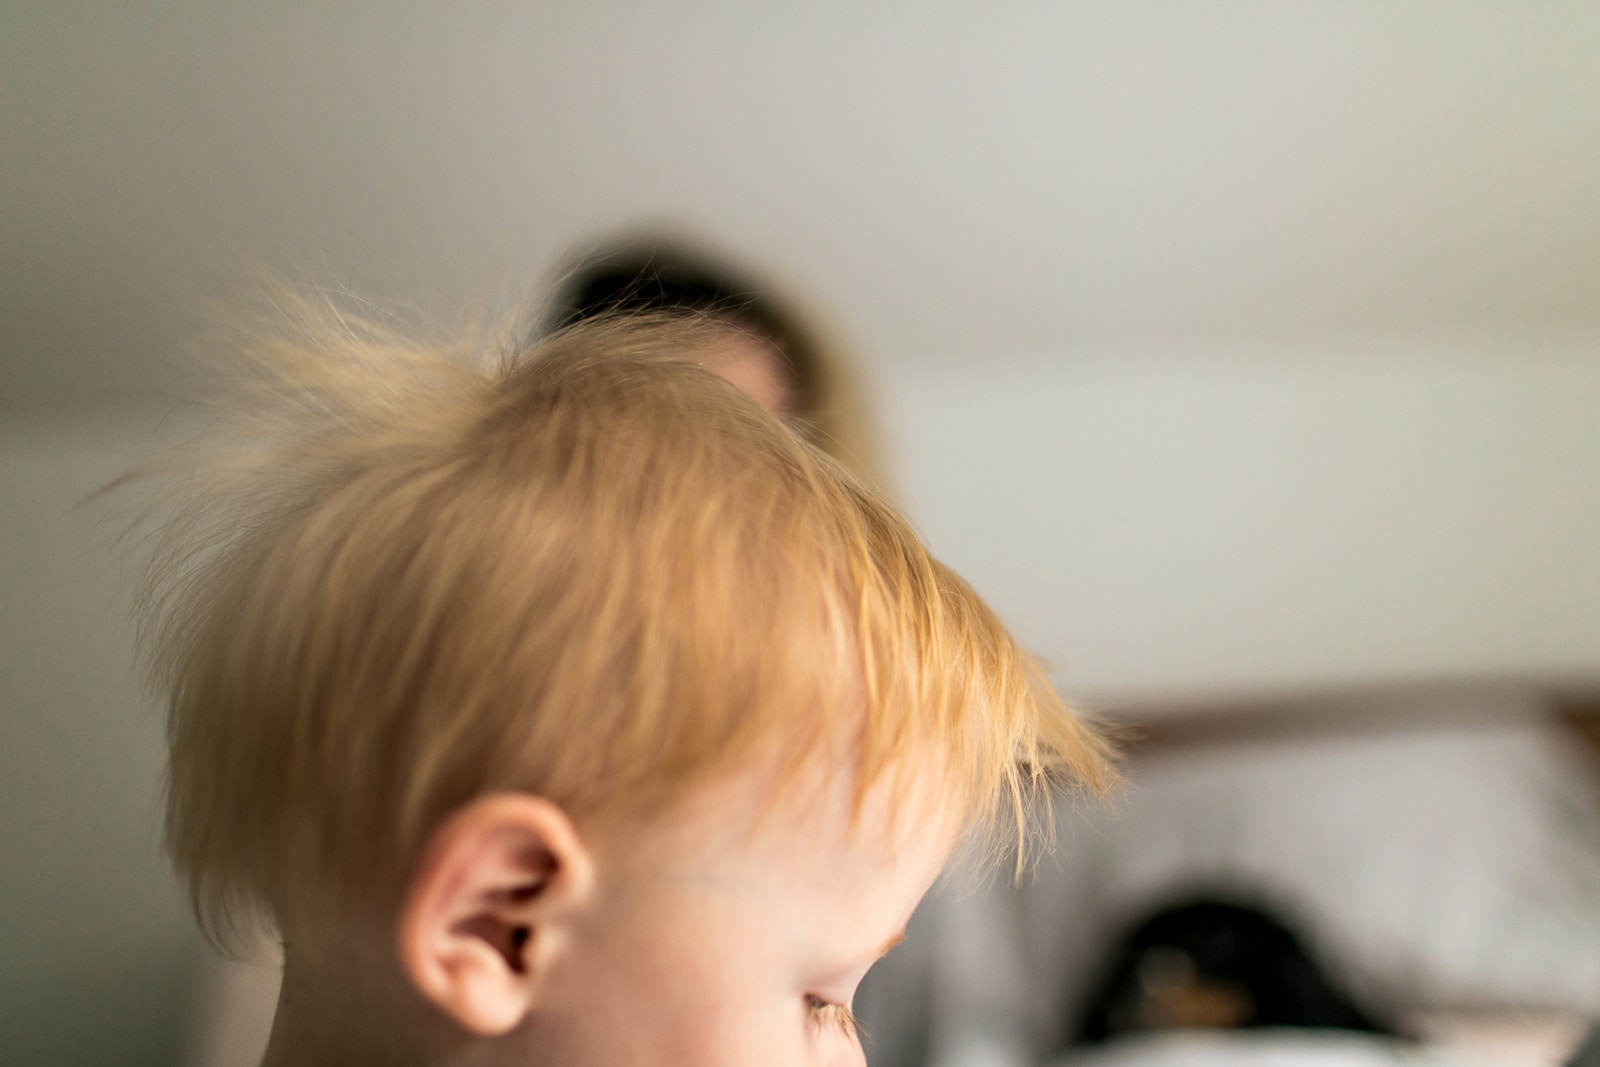 Motherhood: On Bedheads and Embracing Imperfections